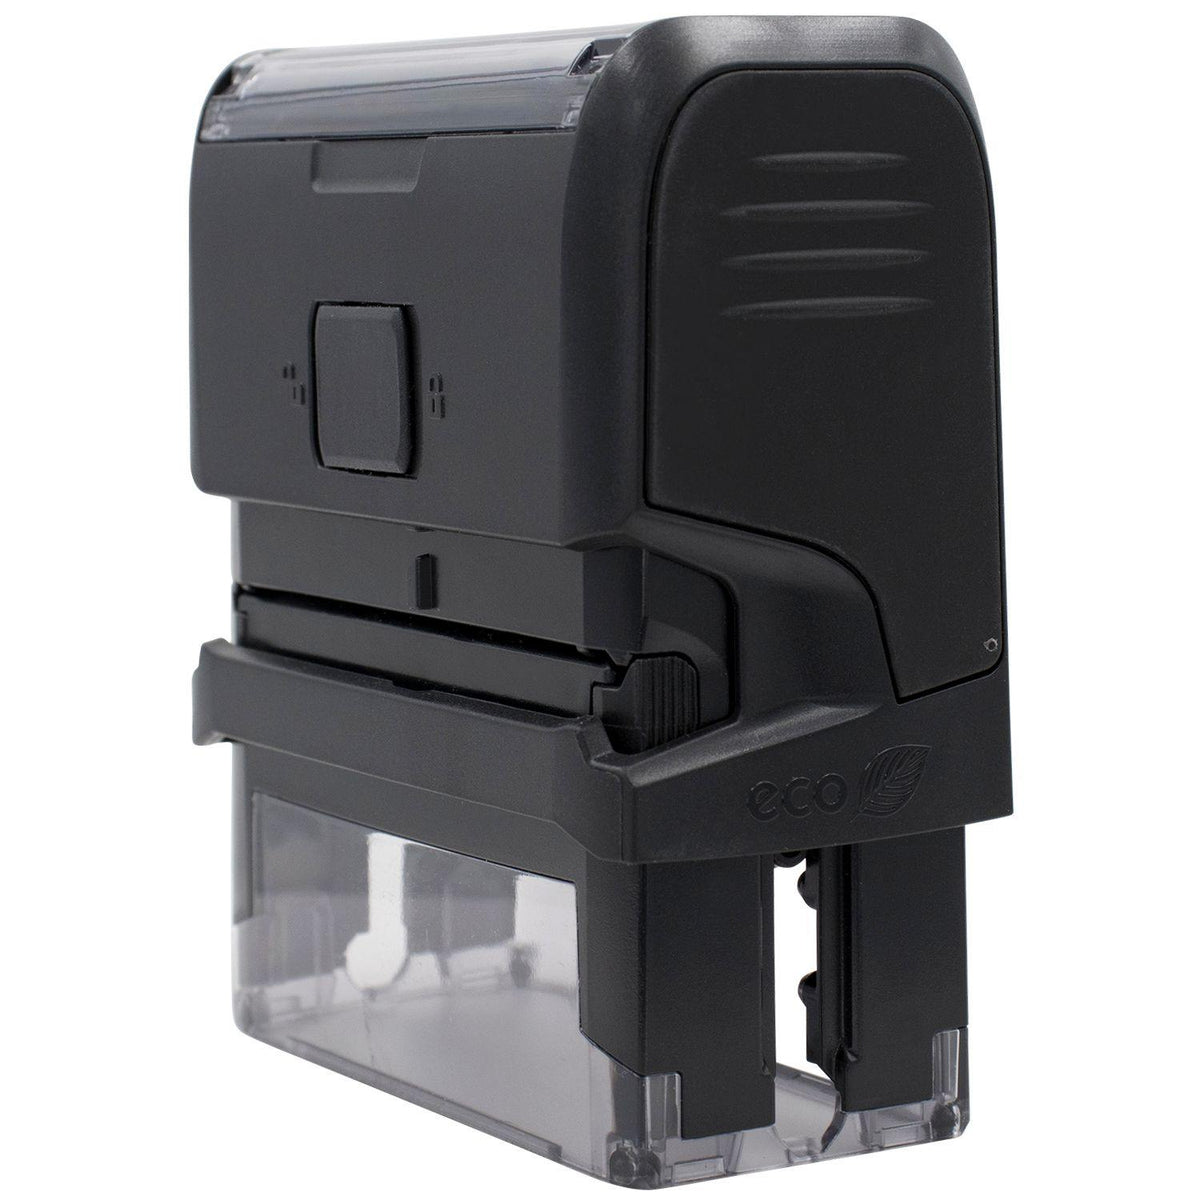 Large Self-Inking This Account is now Overdue Stamp - Engineer Seal Stamps - Brand_Trodat, Impression Size_Large, Stamp Type_Self-Inking Stamp, Type of Use_Accounting, Type of Use_Business, Type of Use_Office